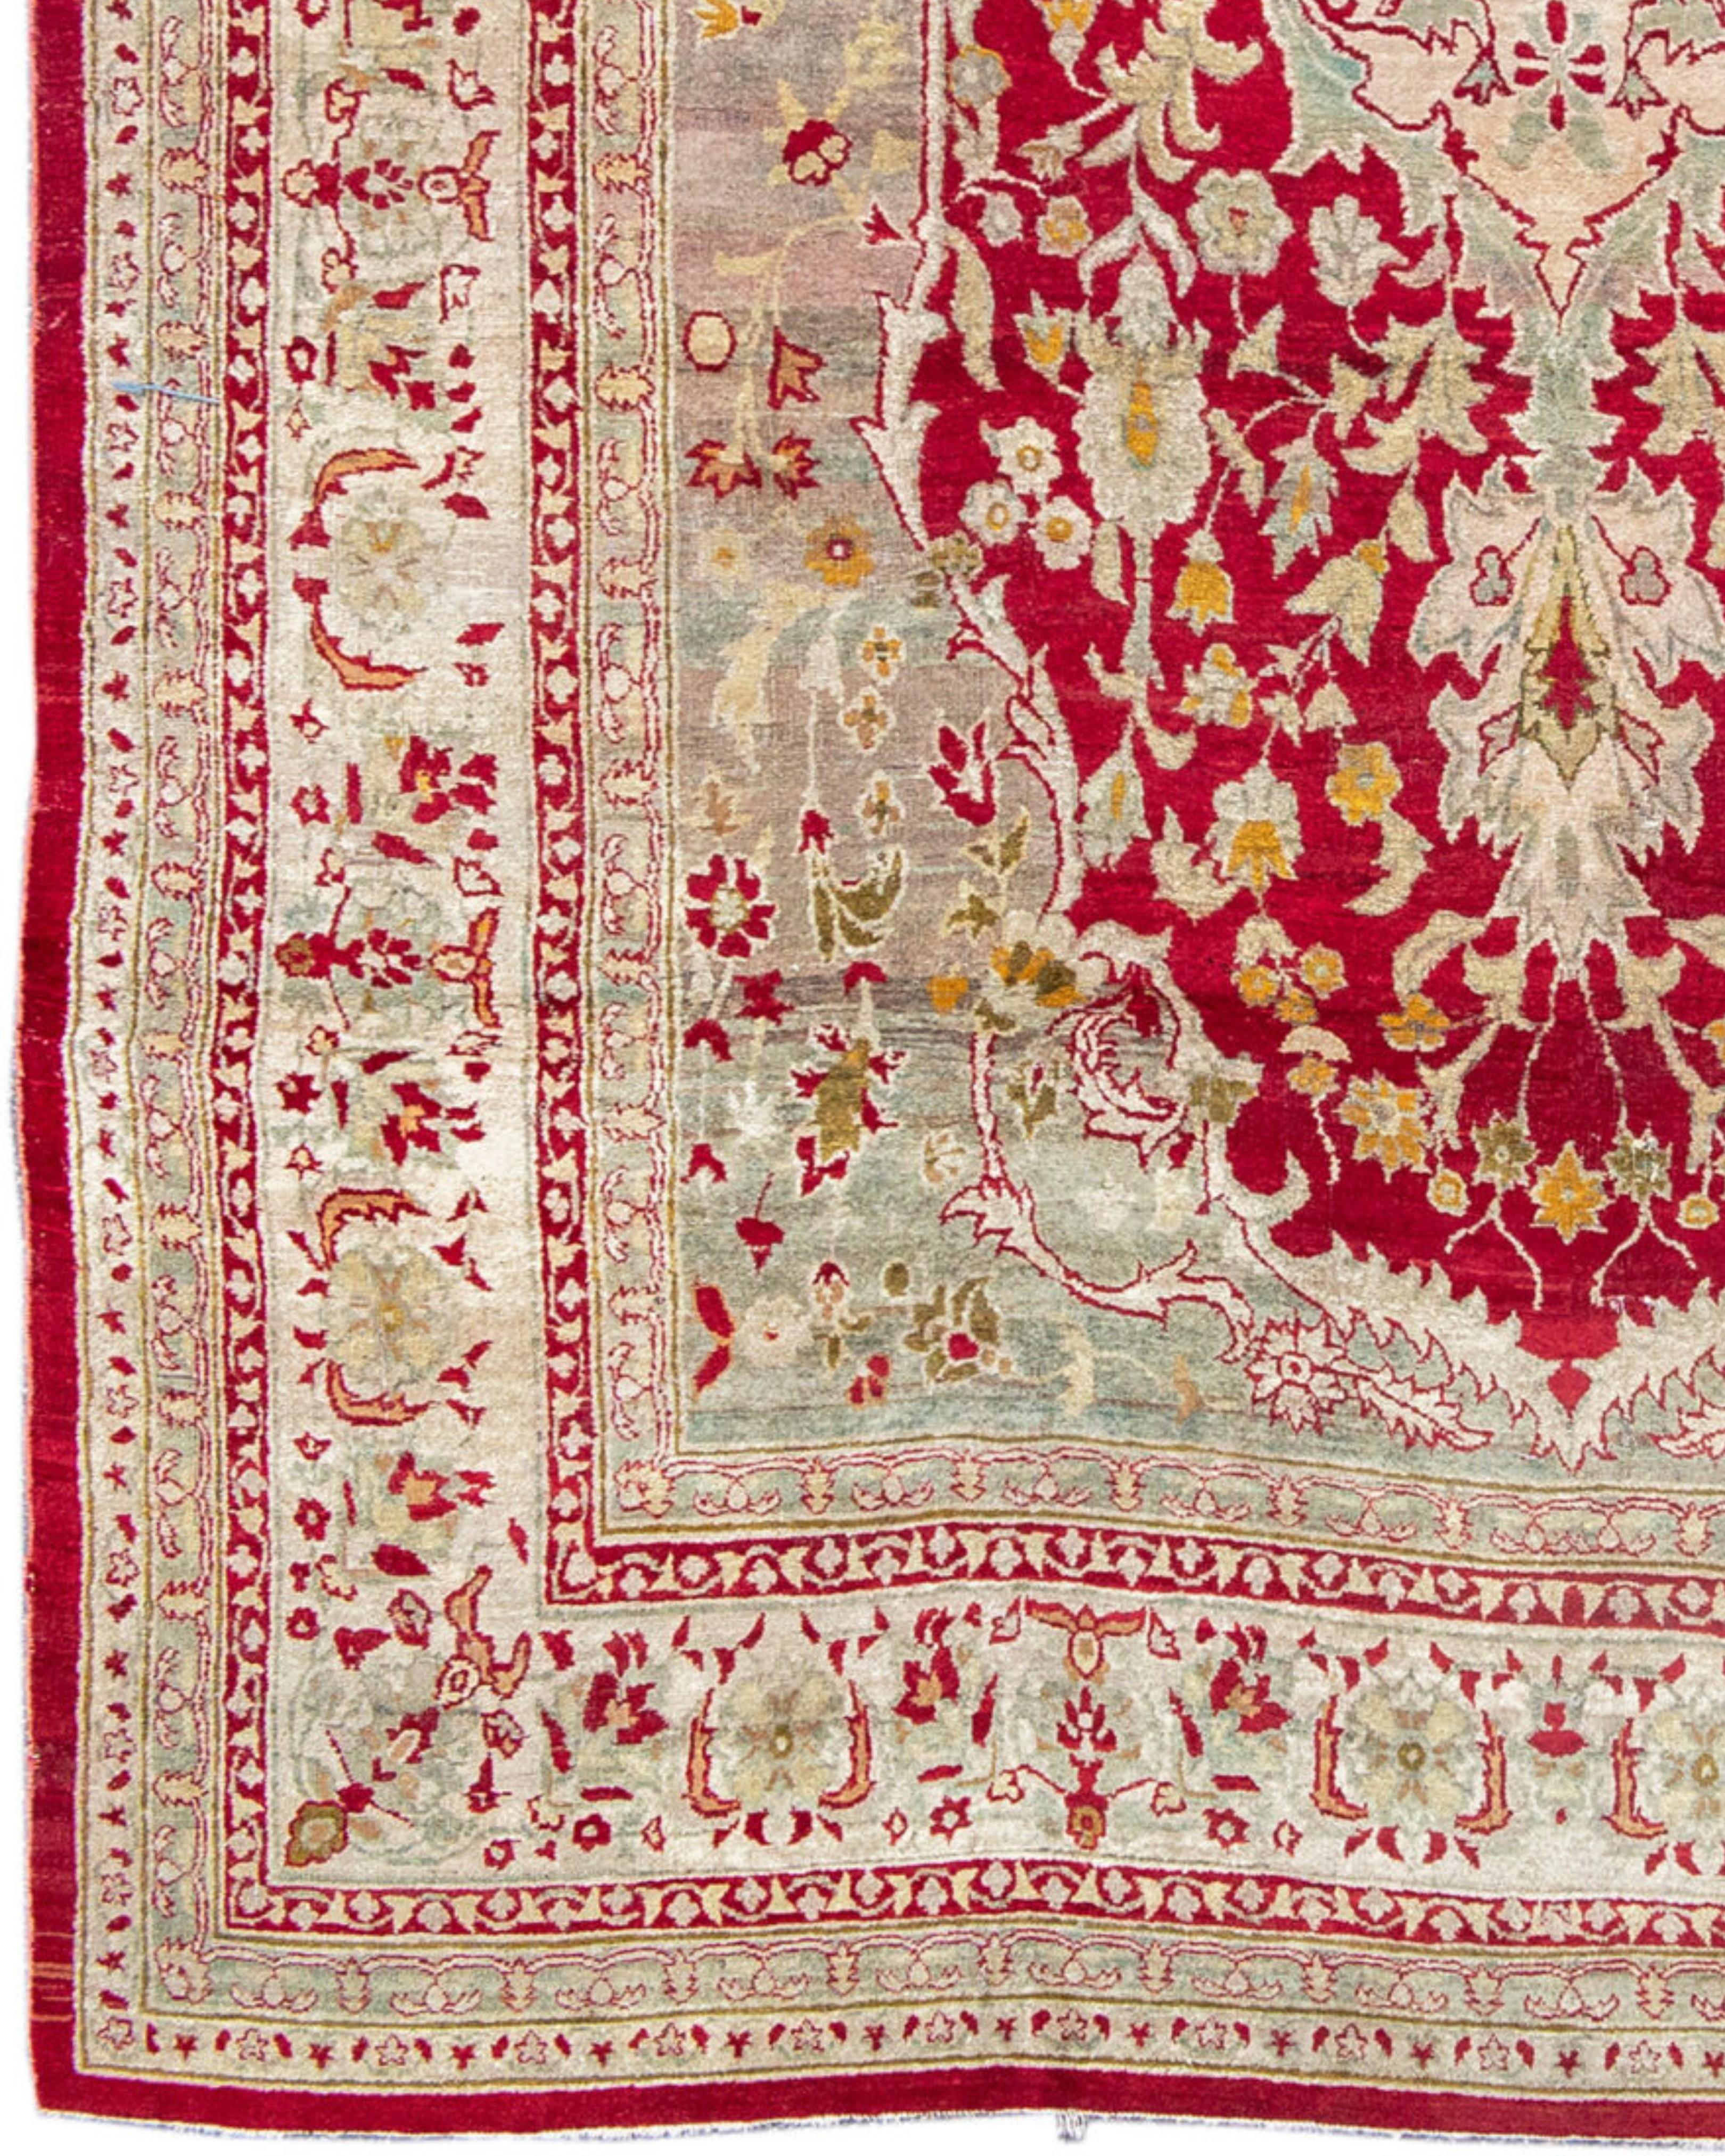 Hand-Woven Antique Red and Gold Indian Agra Carpet, Late 19th Century For Sale